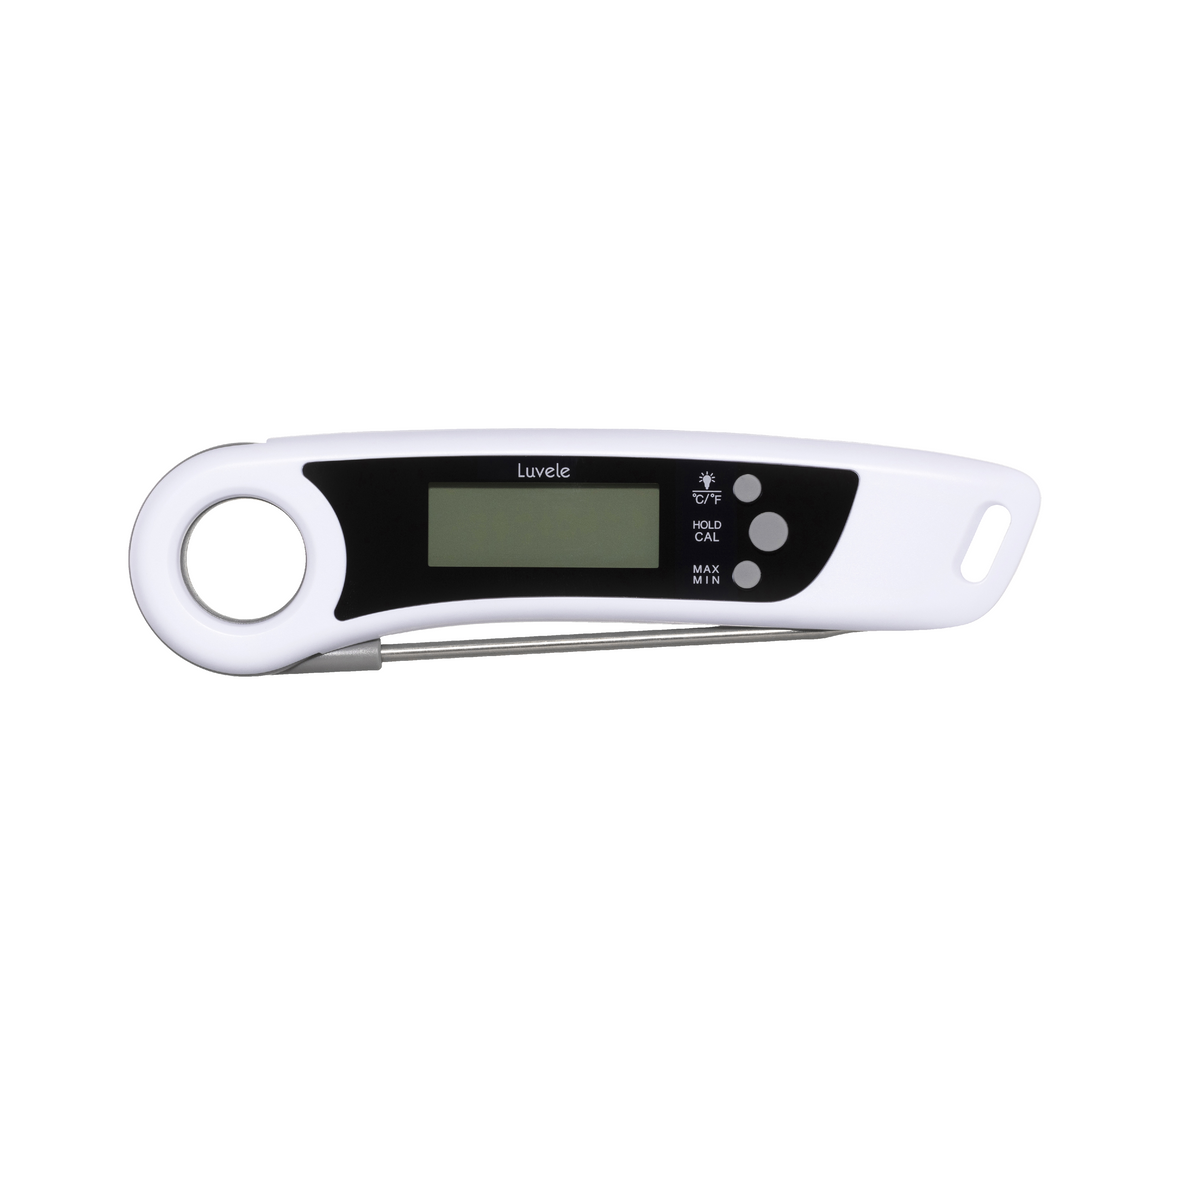 https://cdn.shopify.com/s/files/1/0279/3265/5754/products/LuveleThermometer4_1200x.png?v=1679616378